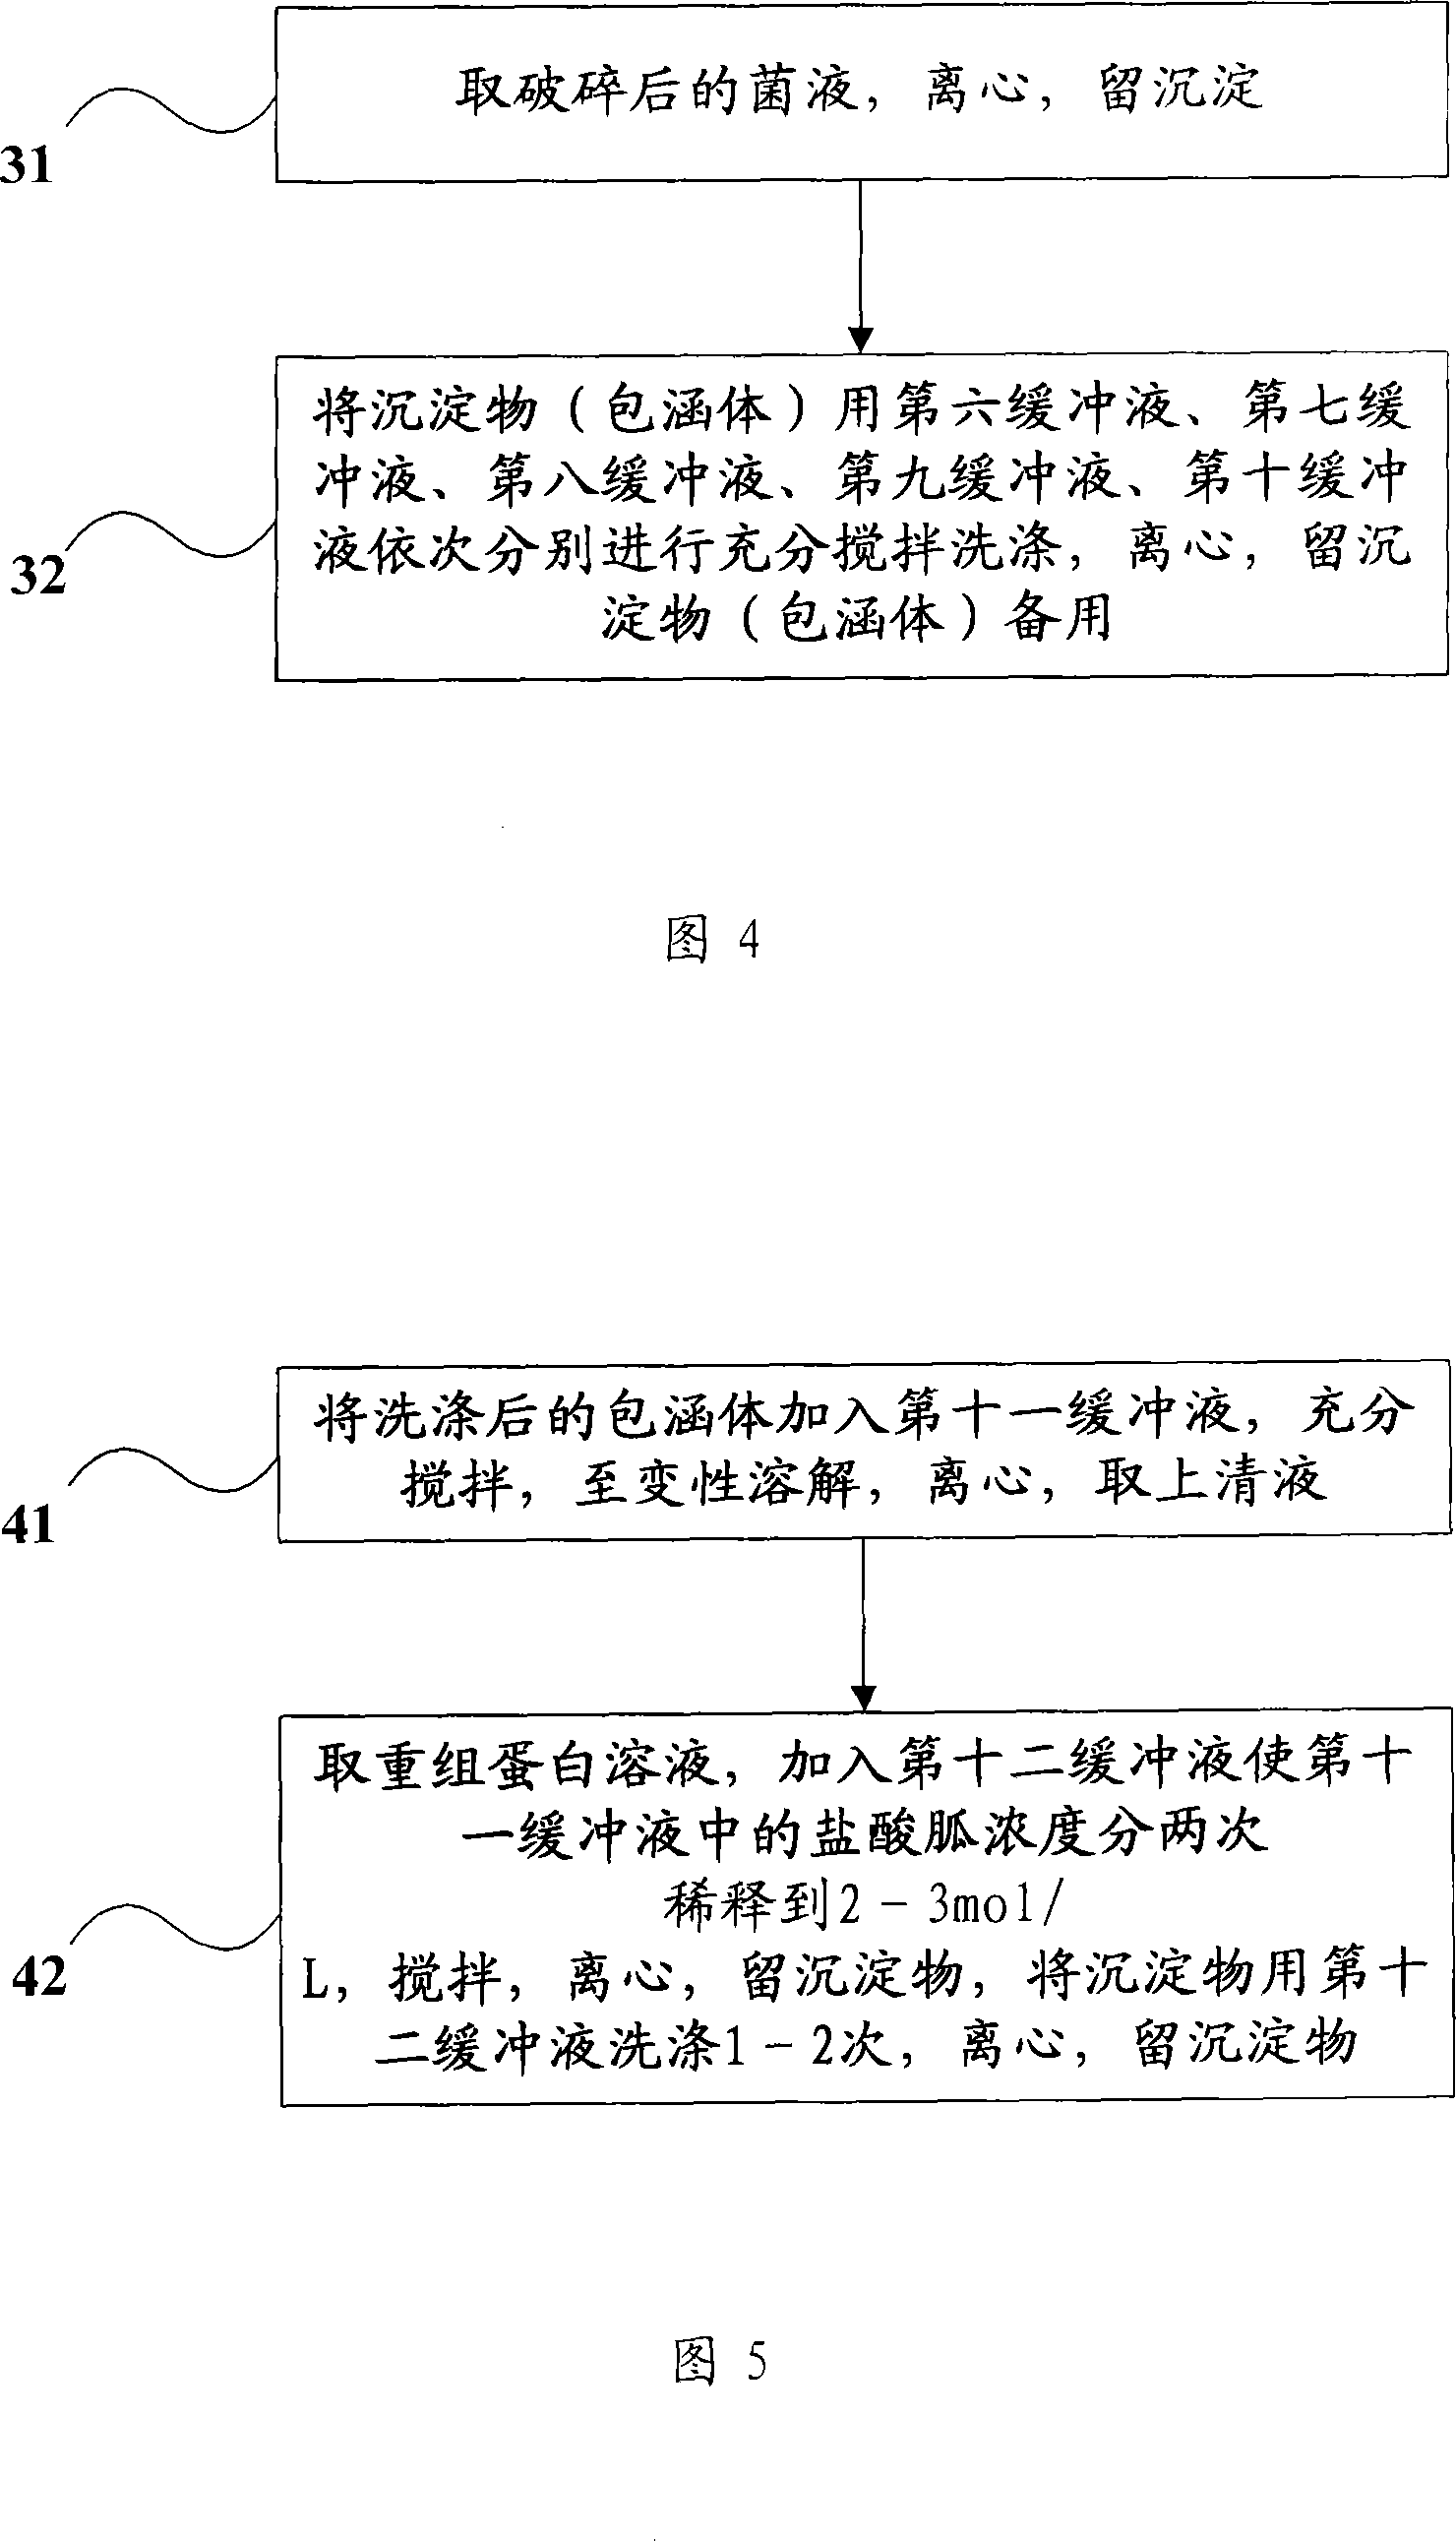 Extraction and purification process for recombinant protein